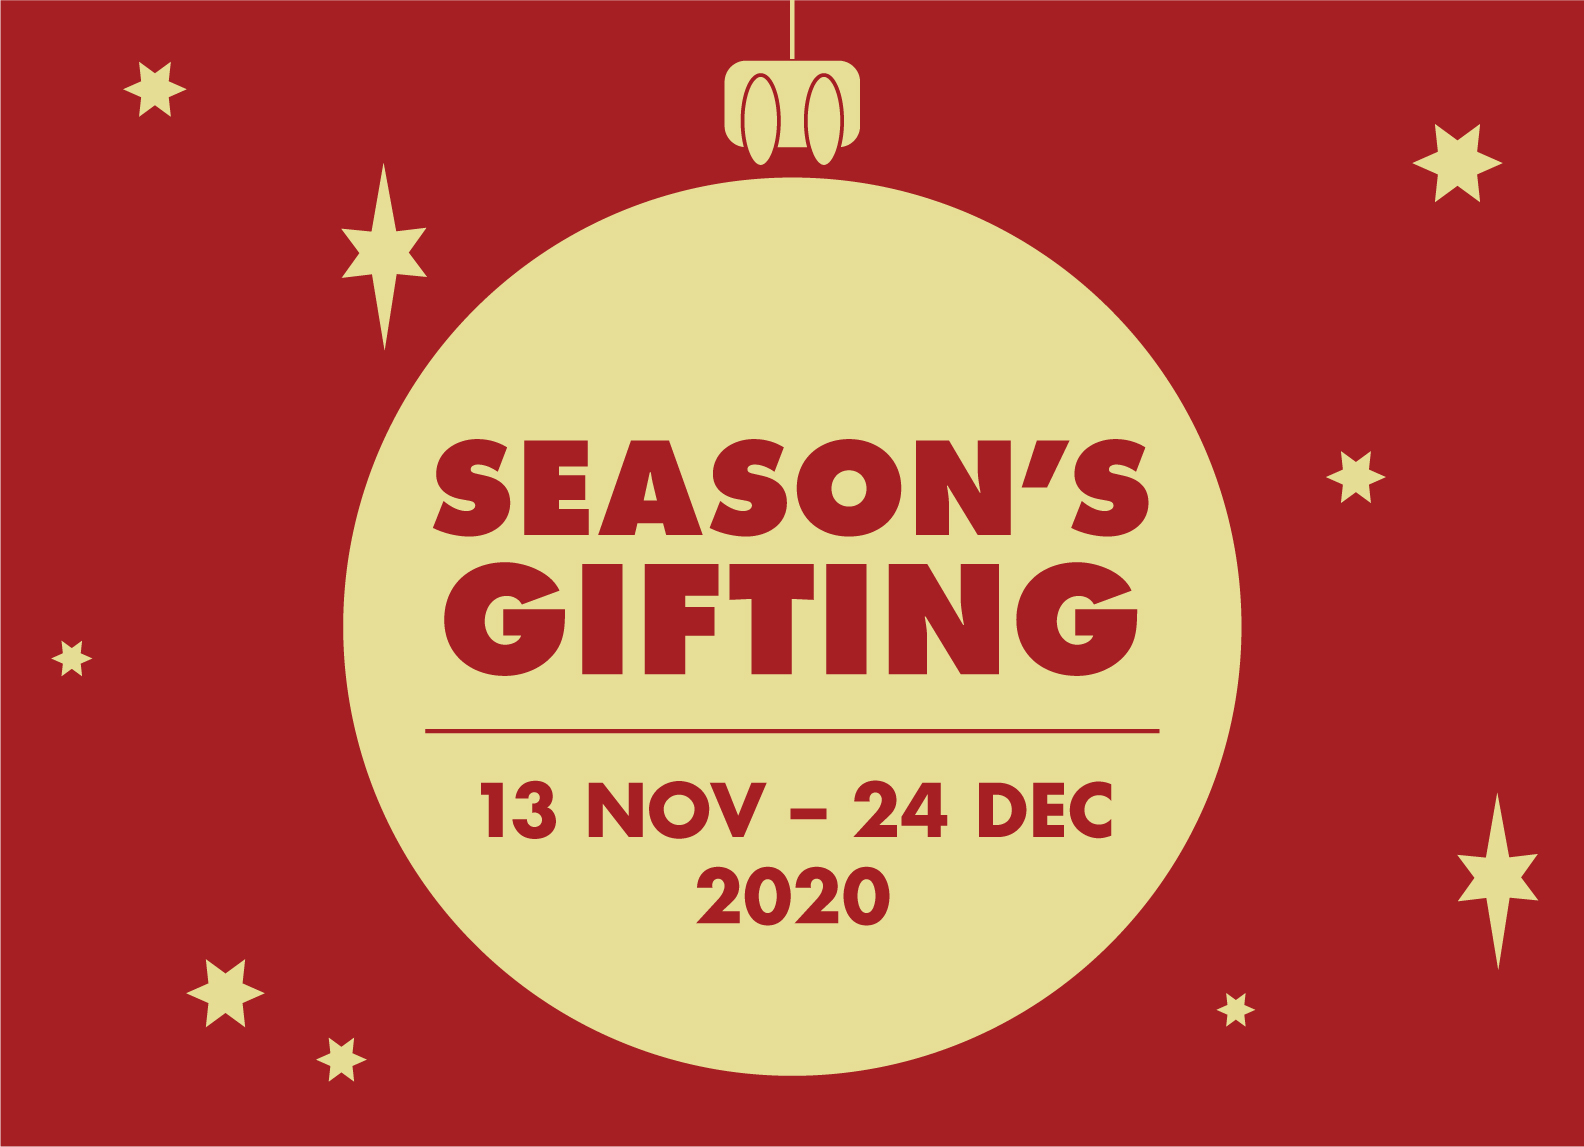 It's the Season of Gifting at Anchorpoint